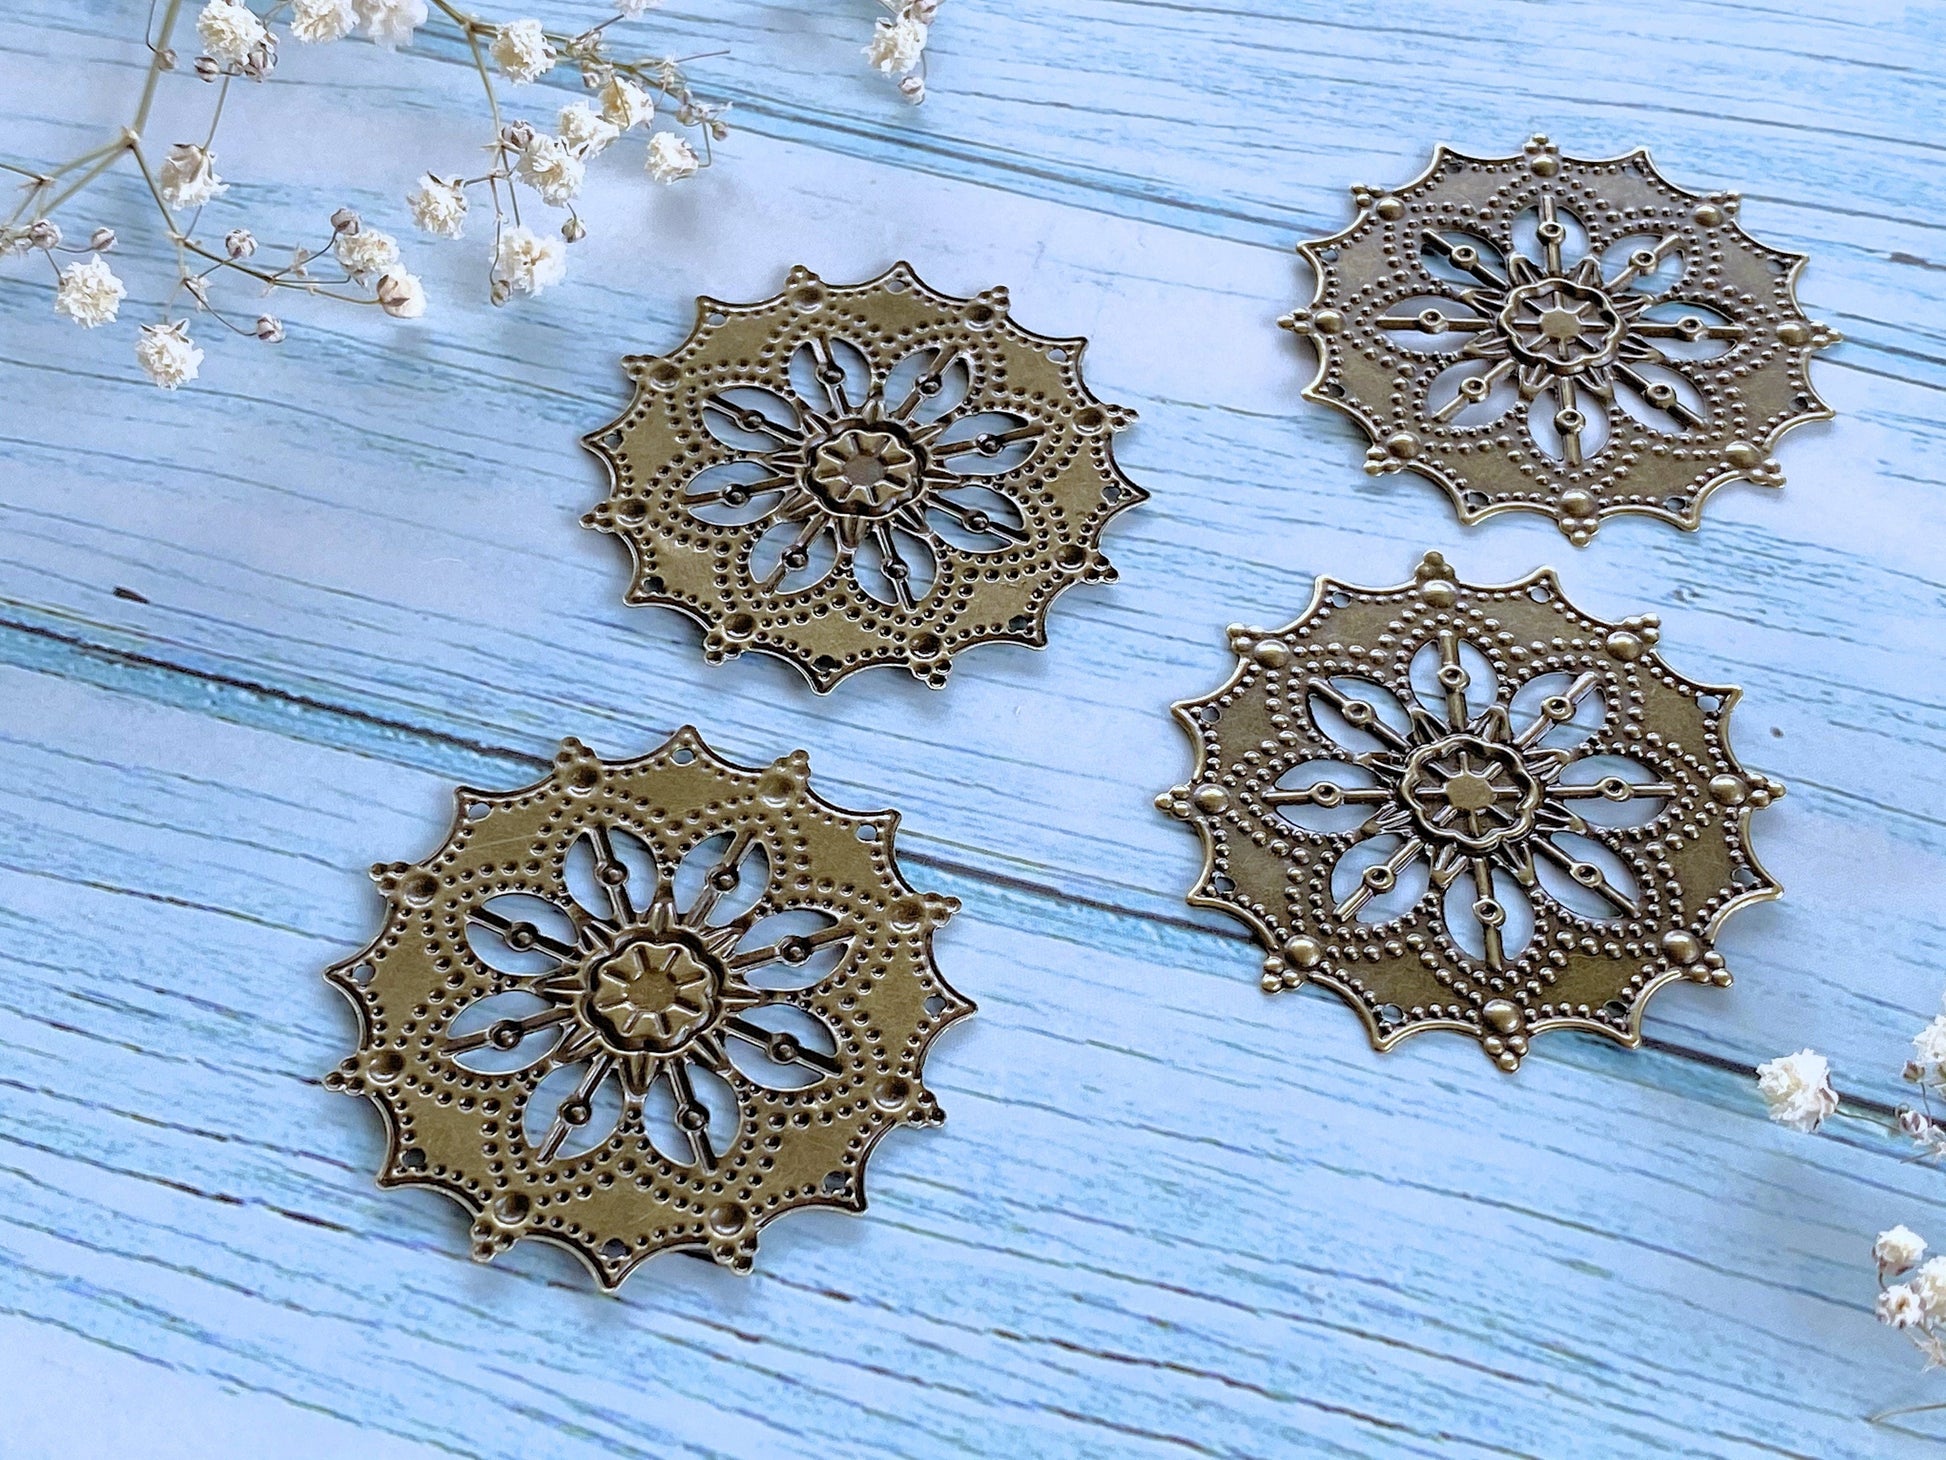 2pcs Round Filigree Jewelry Making Connector